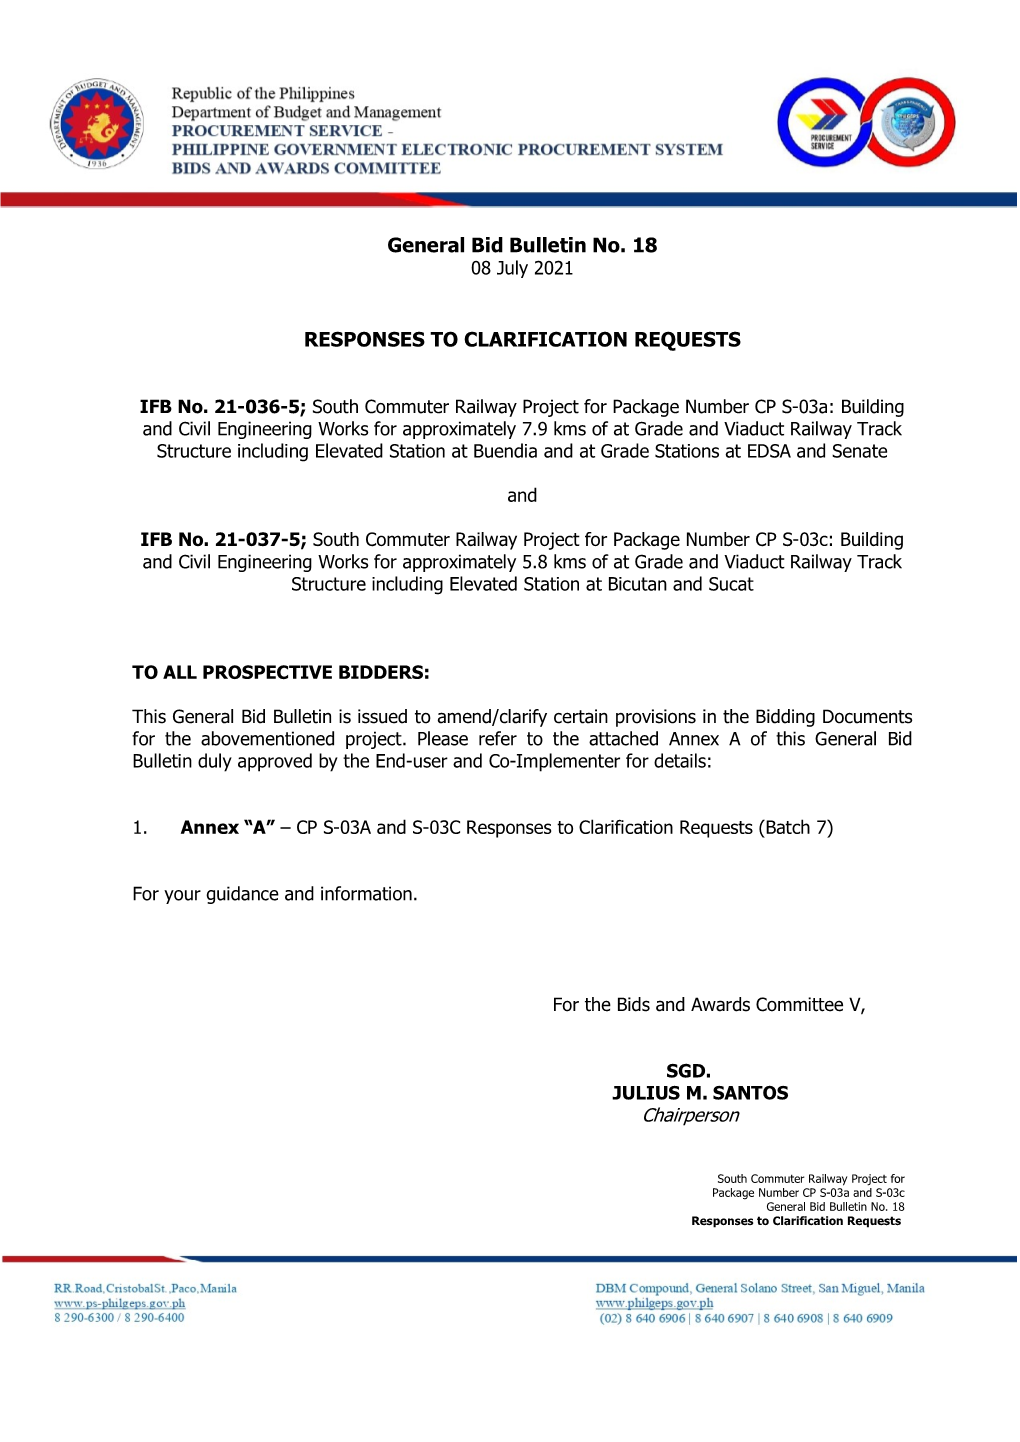 General Bid Bulletin No. 18 RESPONSES to CLARIFICATION REQUESTS Chairperson